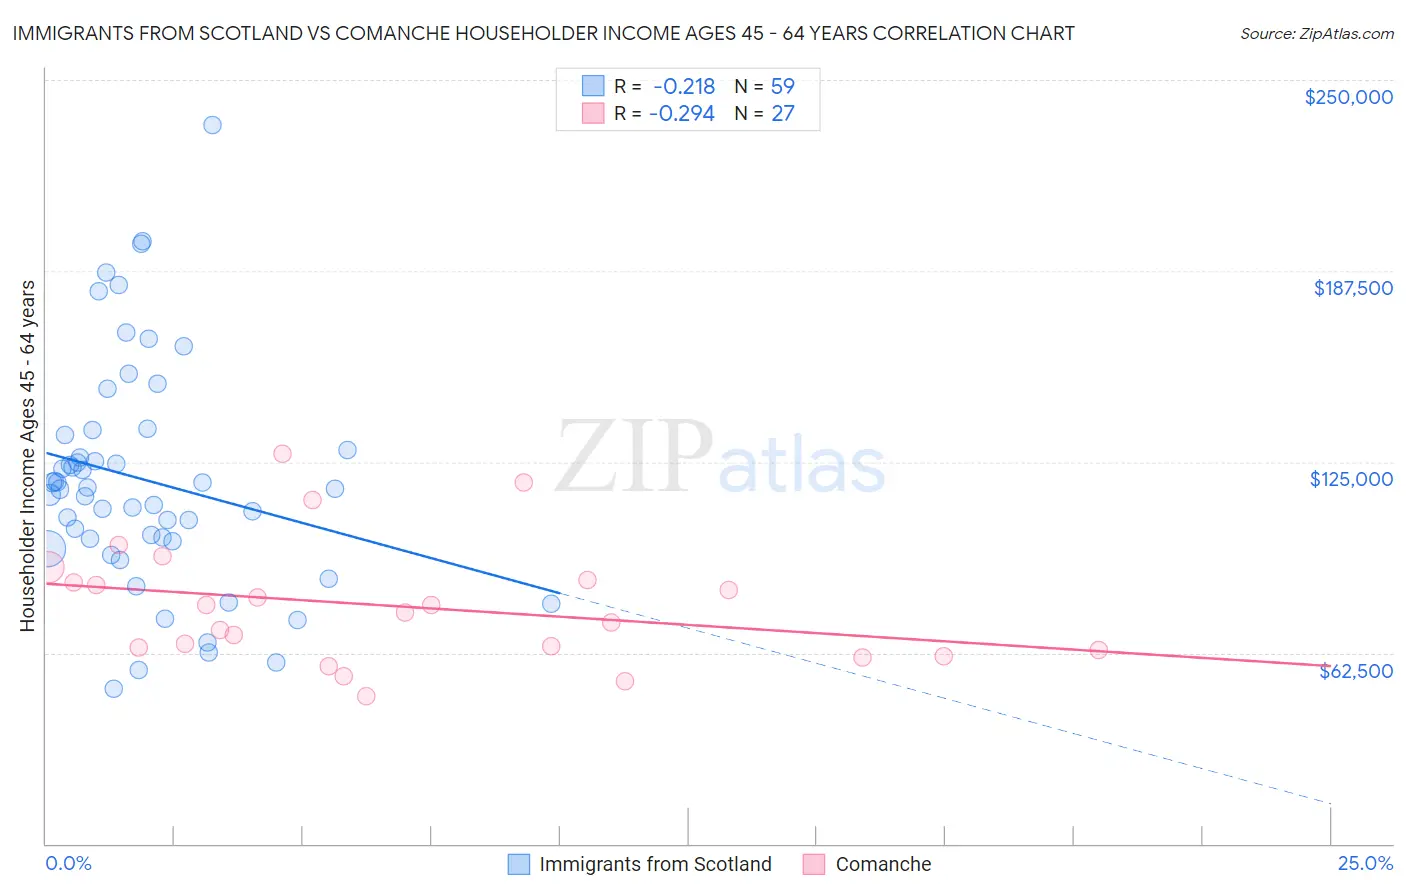 Immigrants from Scotland vs Comanche Householder Income Ages 45 - 64 years